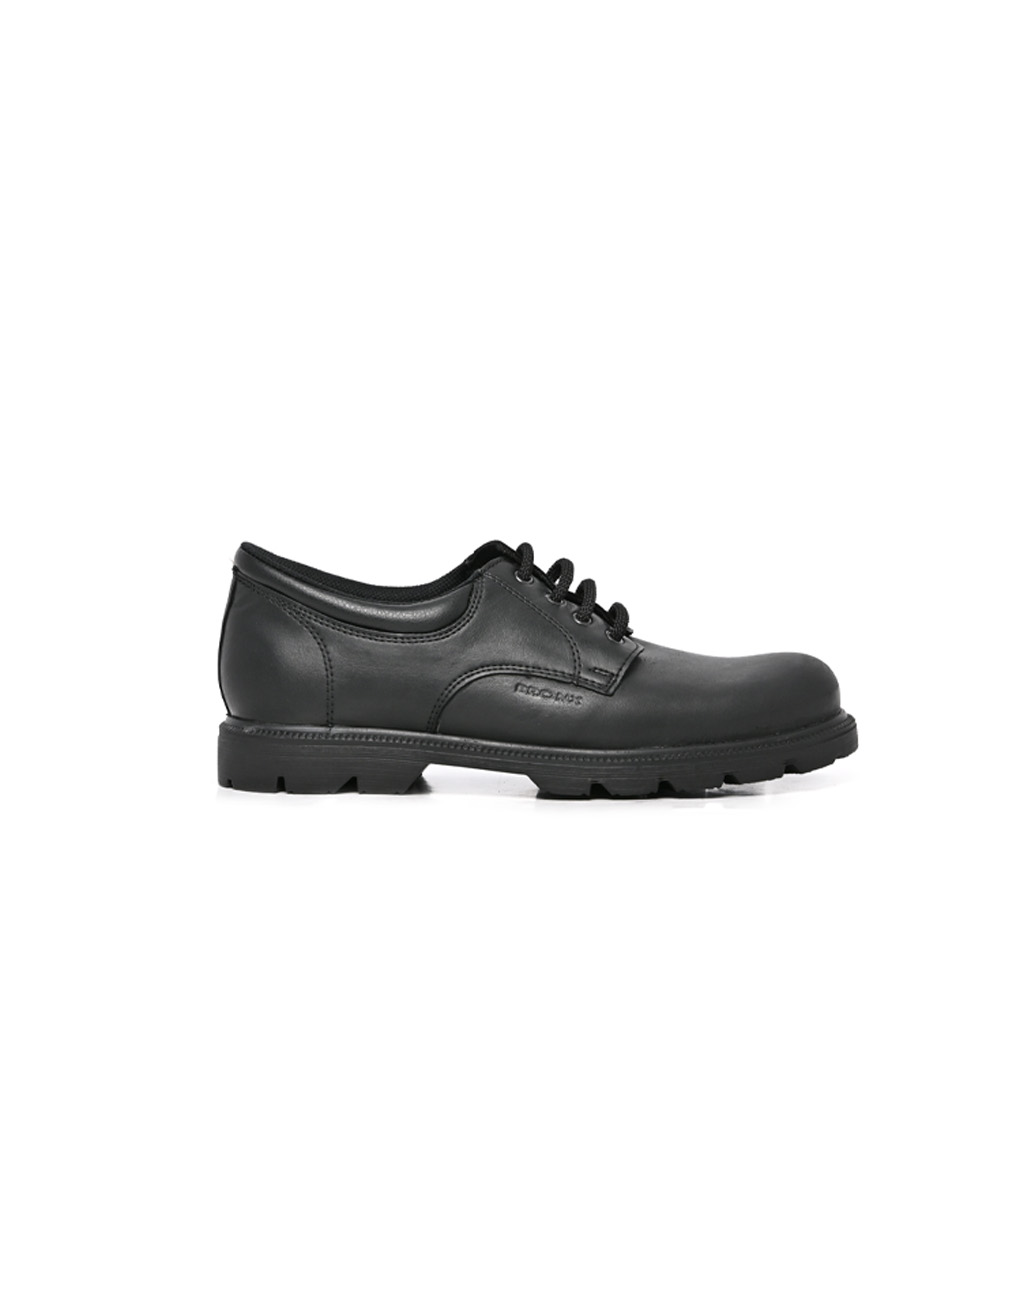 Mens Bronx, Lighty, Casual Black Lace Up – Bolton Shoes